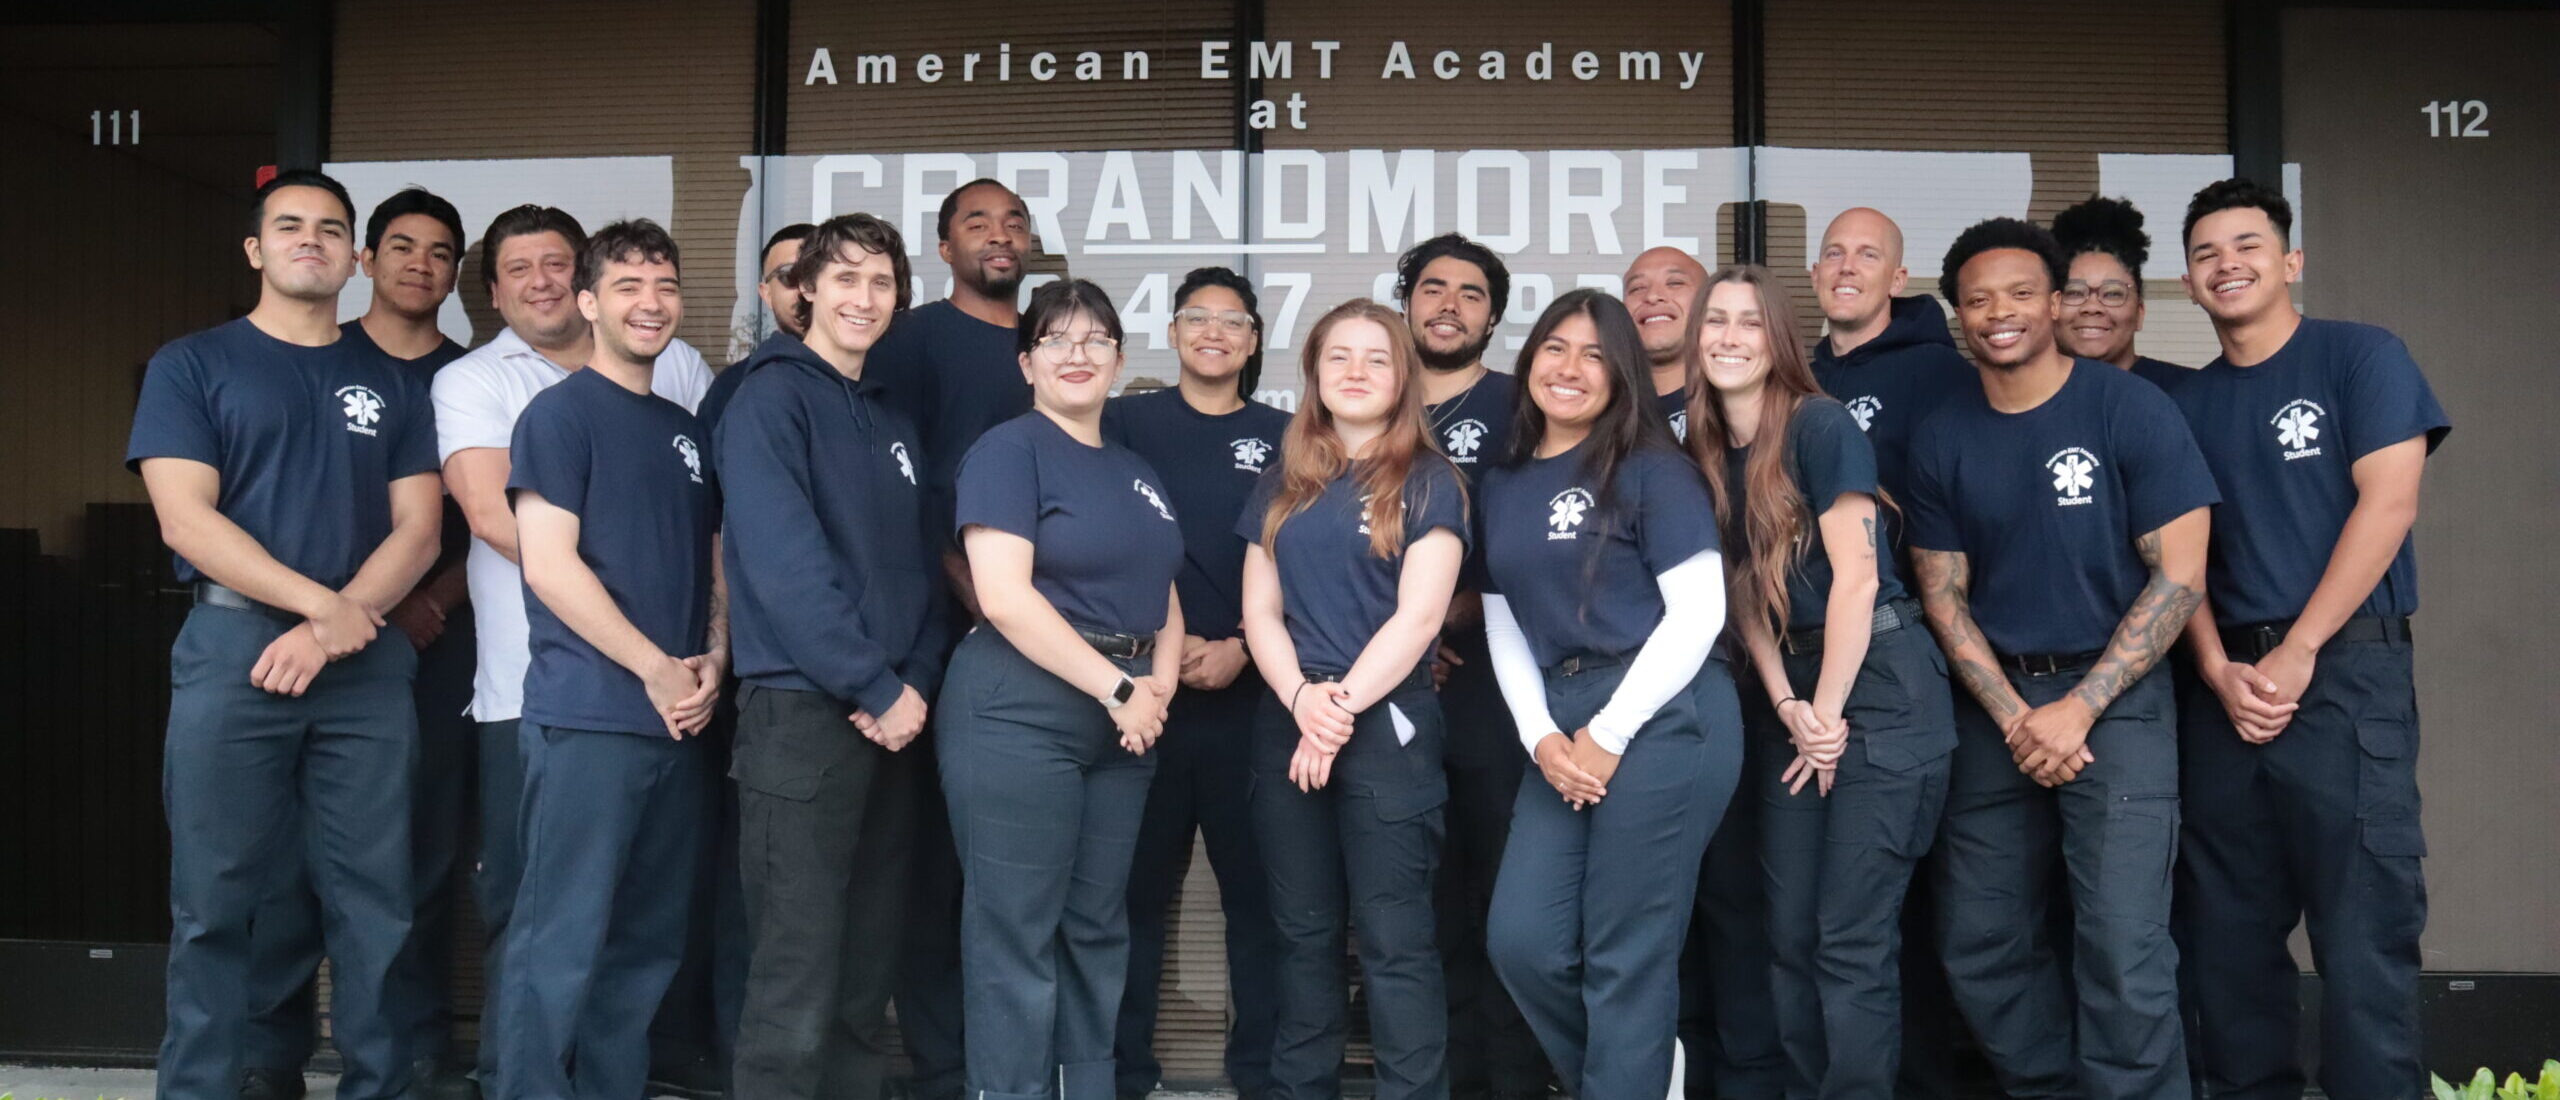 EMT American EMT Academy: Learn to Save a Life and Make a Difference